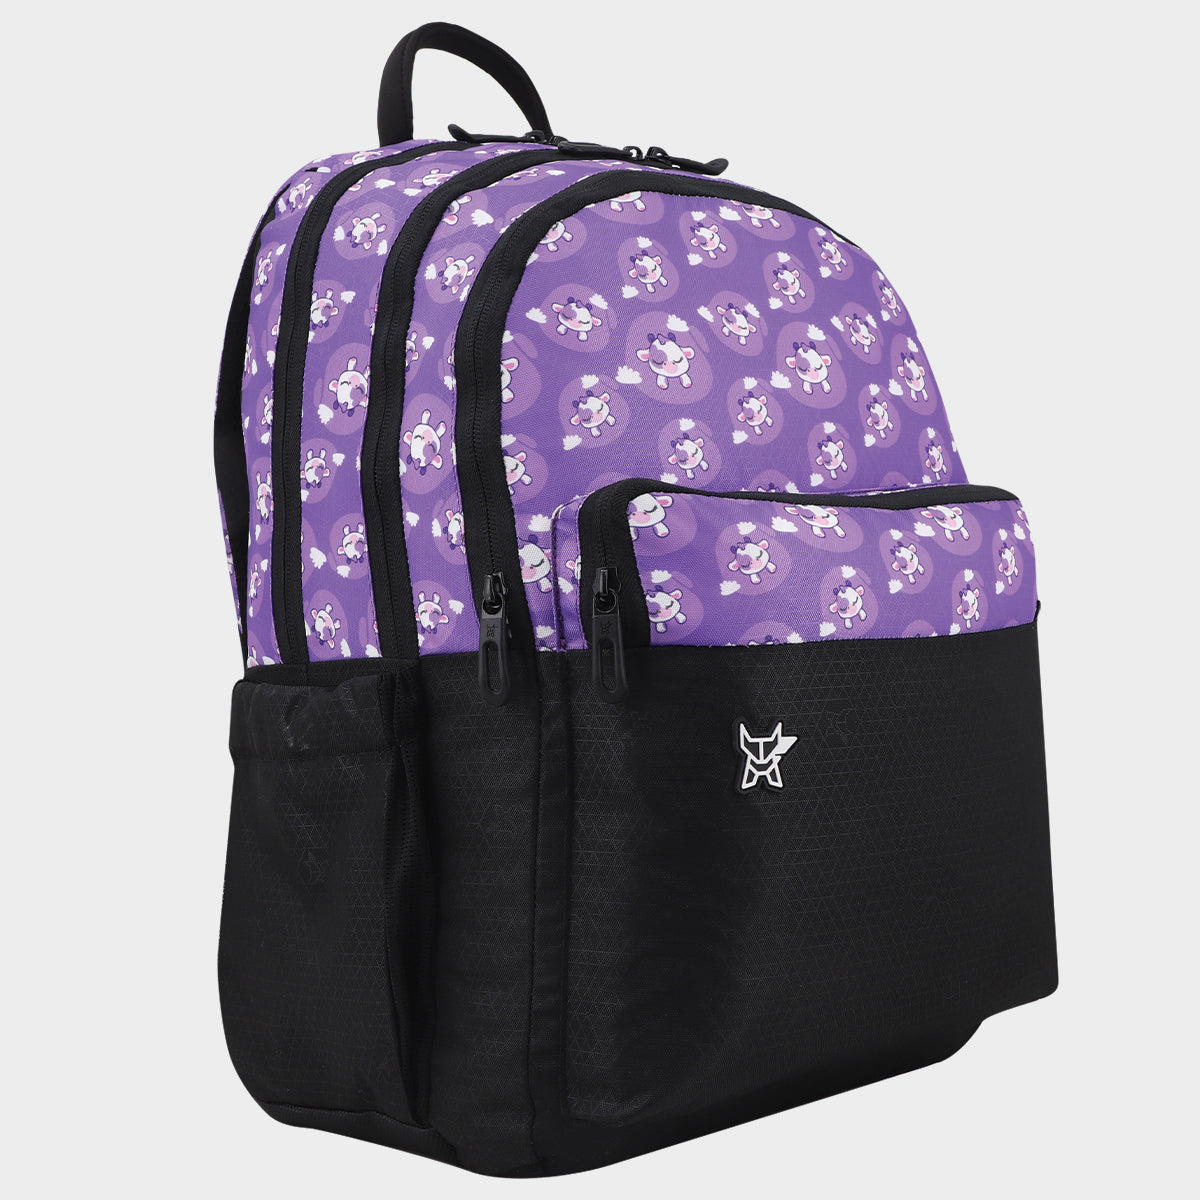 Arctic Fox School Bag and Kids Backpack for Girls and Boys Silly Calf Lavender